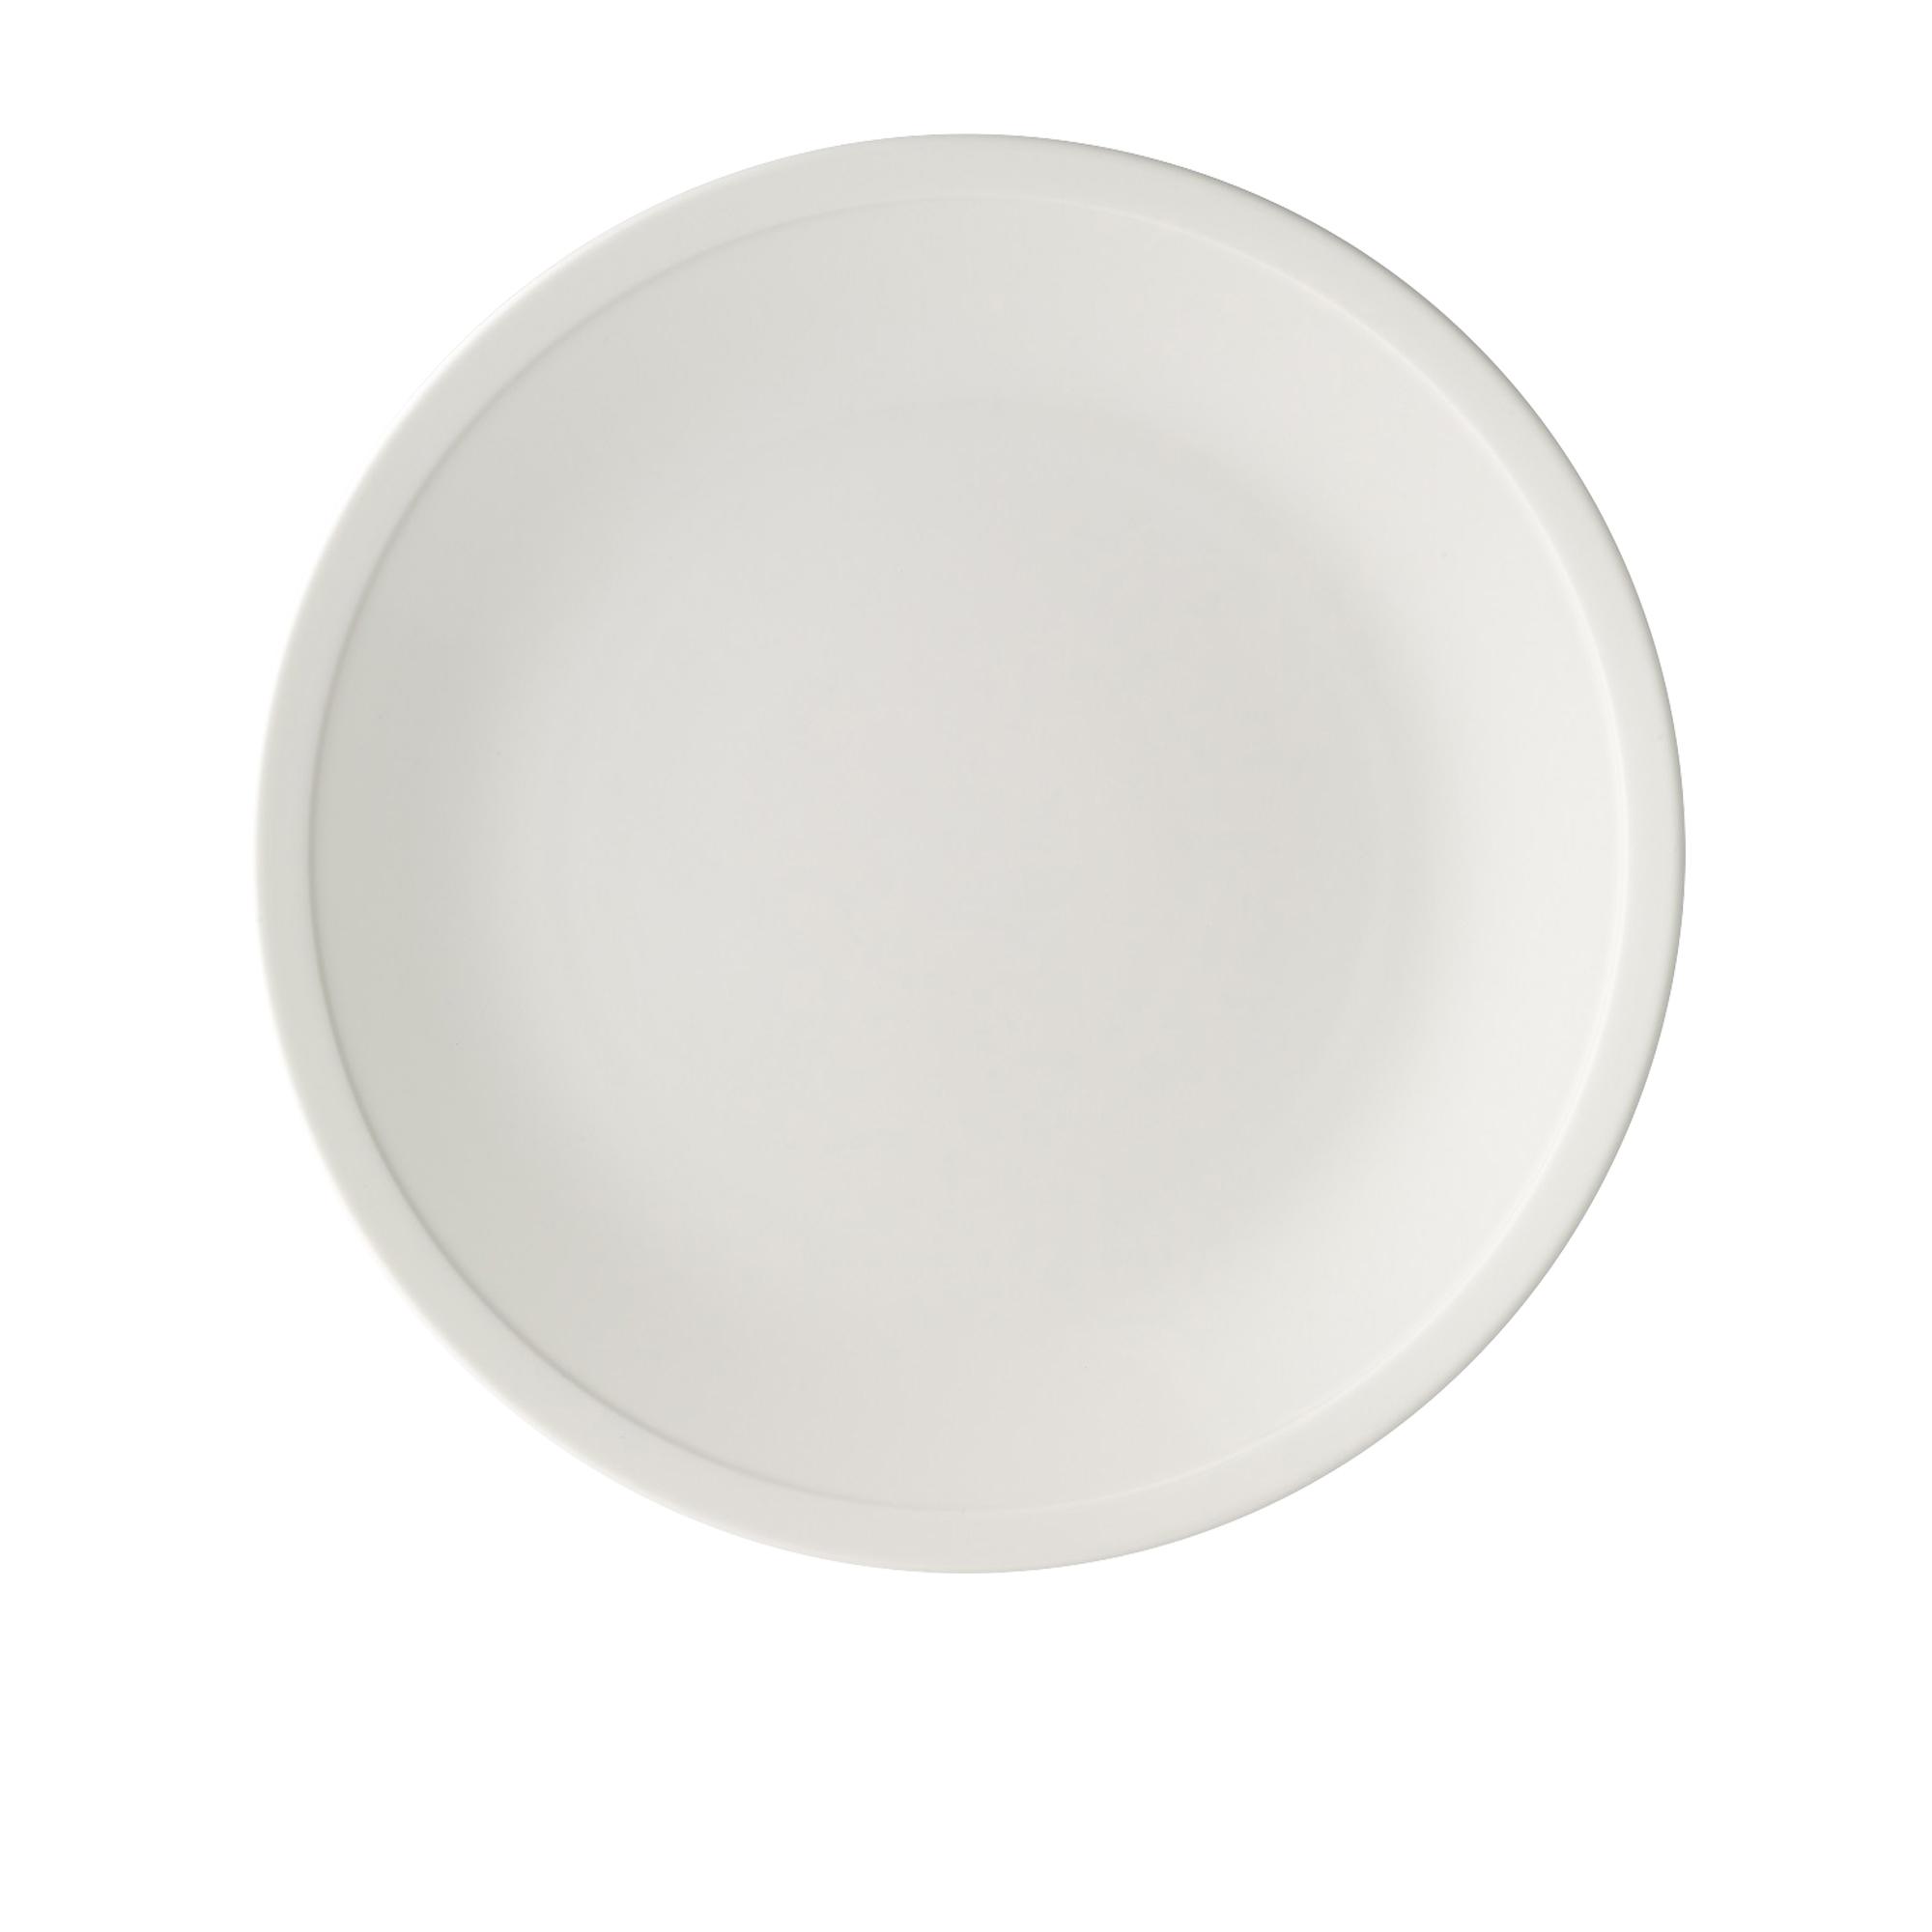 Noritake Everyday by Adam Liaw Dinner Plate Set of 4 White Image 6